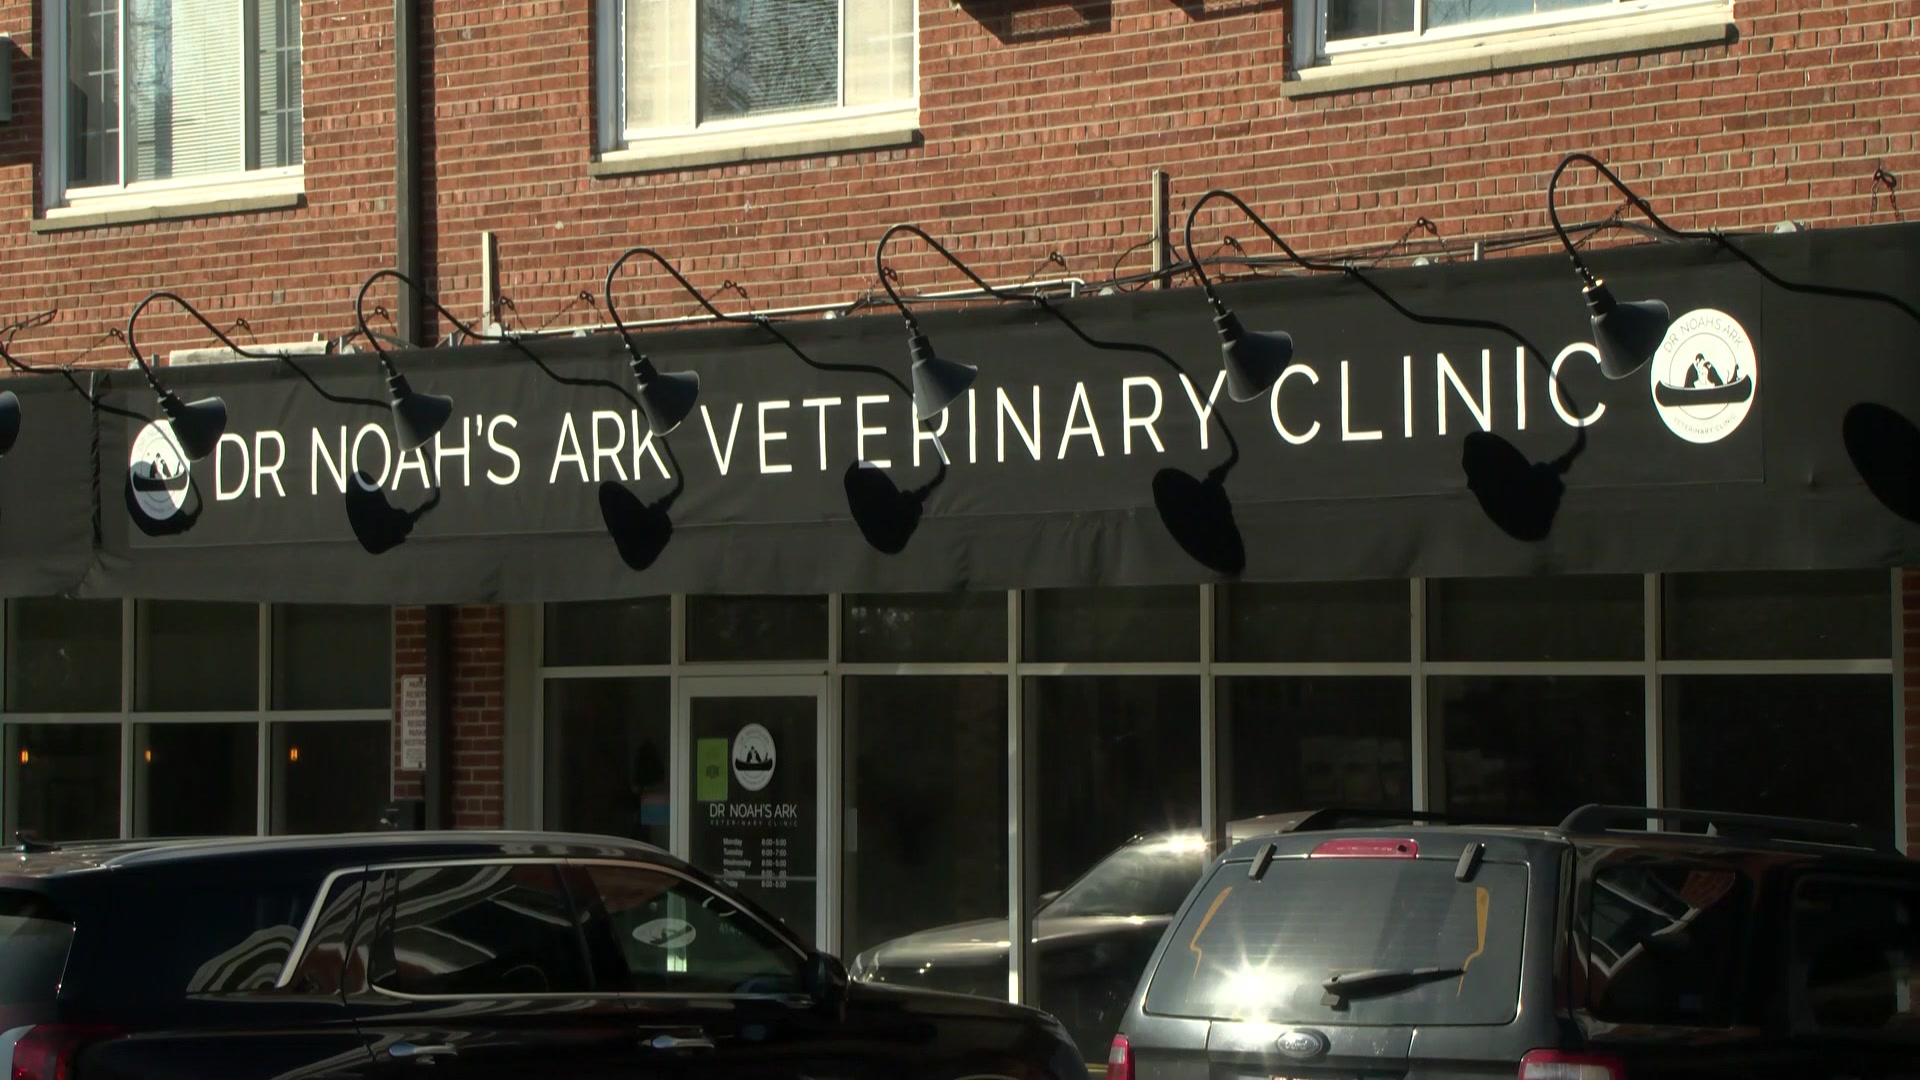 Dr. Noah's Ark Veterinary Clinic shuts down following owner's death